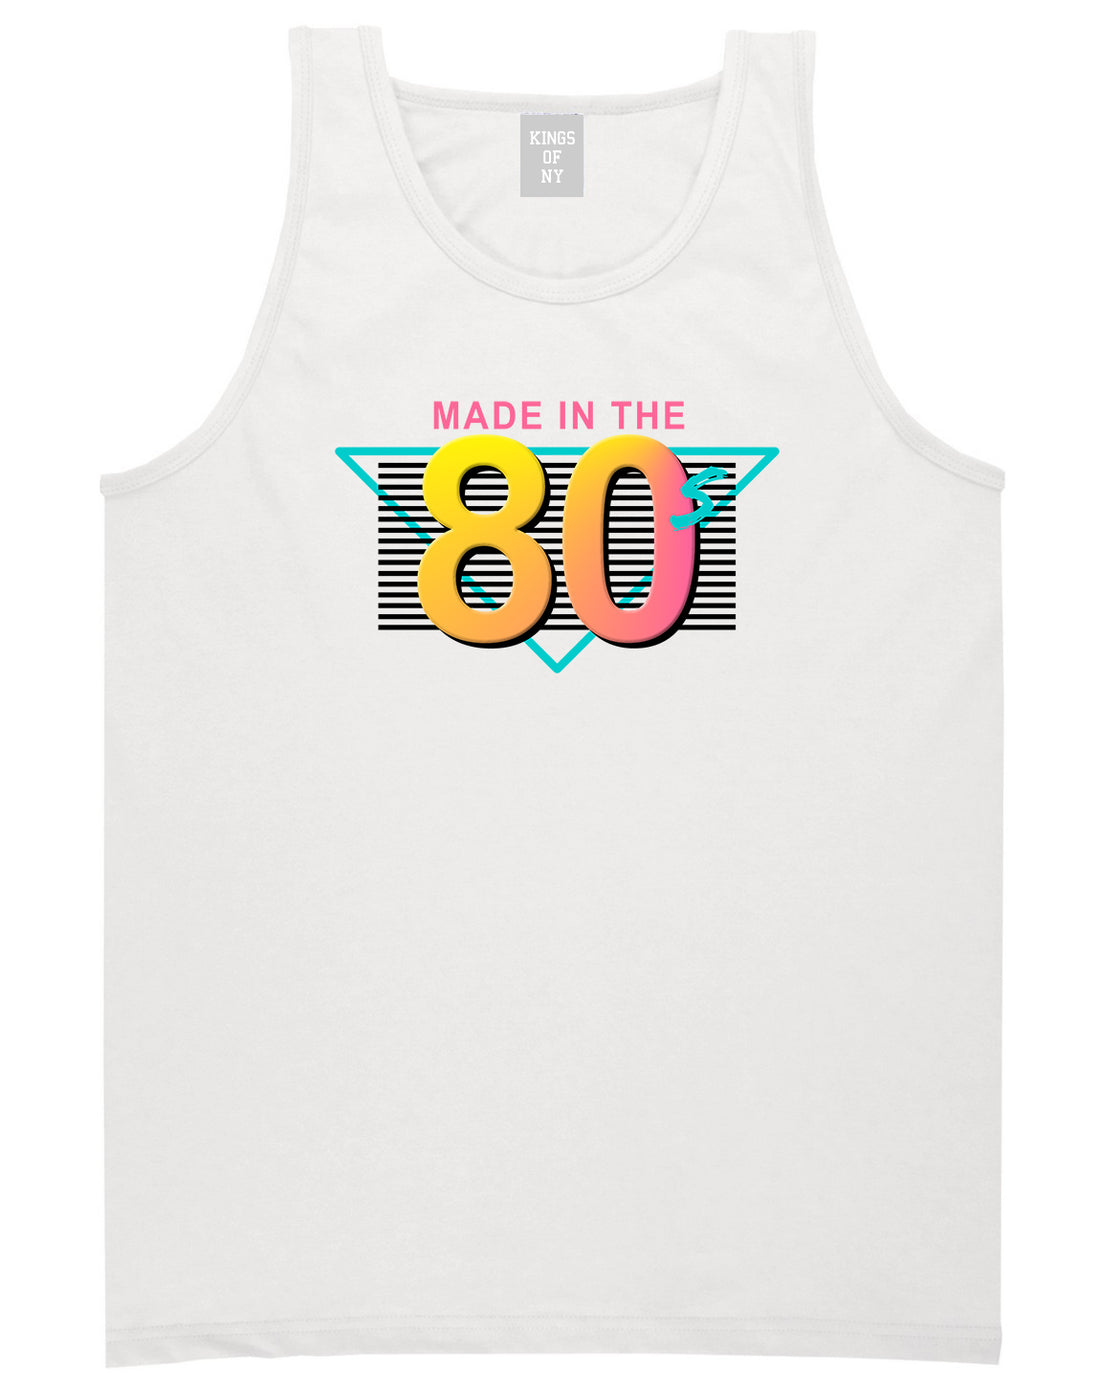 Made In The 80s Retro Mens Tank Top Shirt White by Kings Of NY